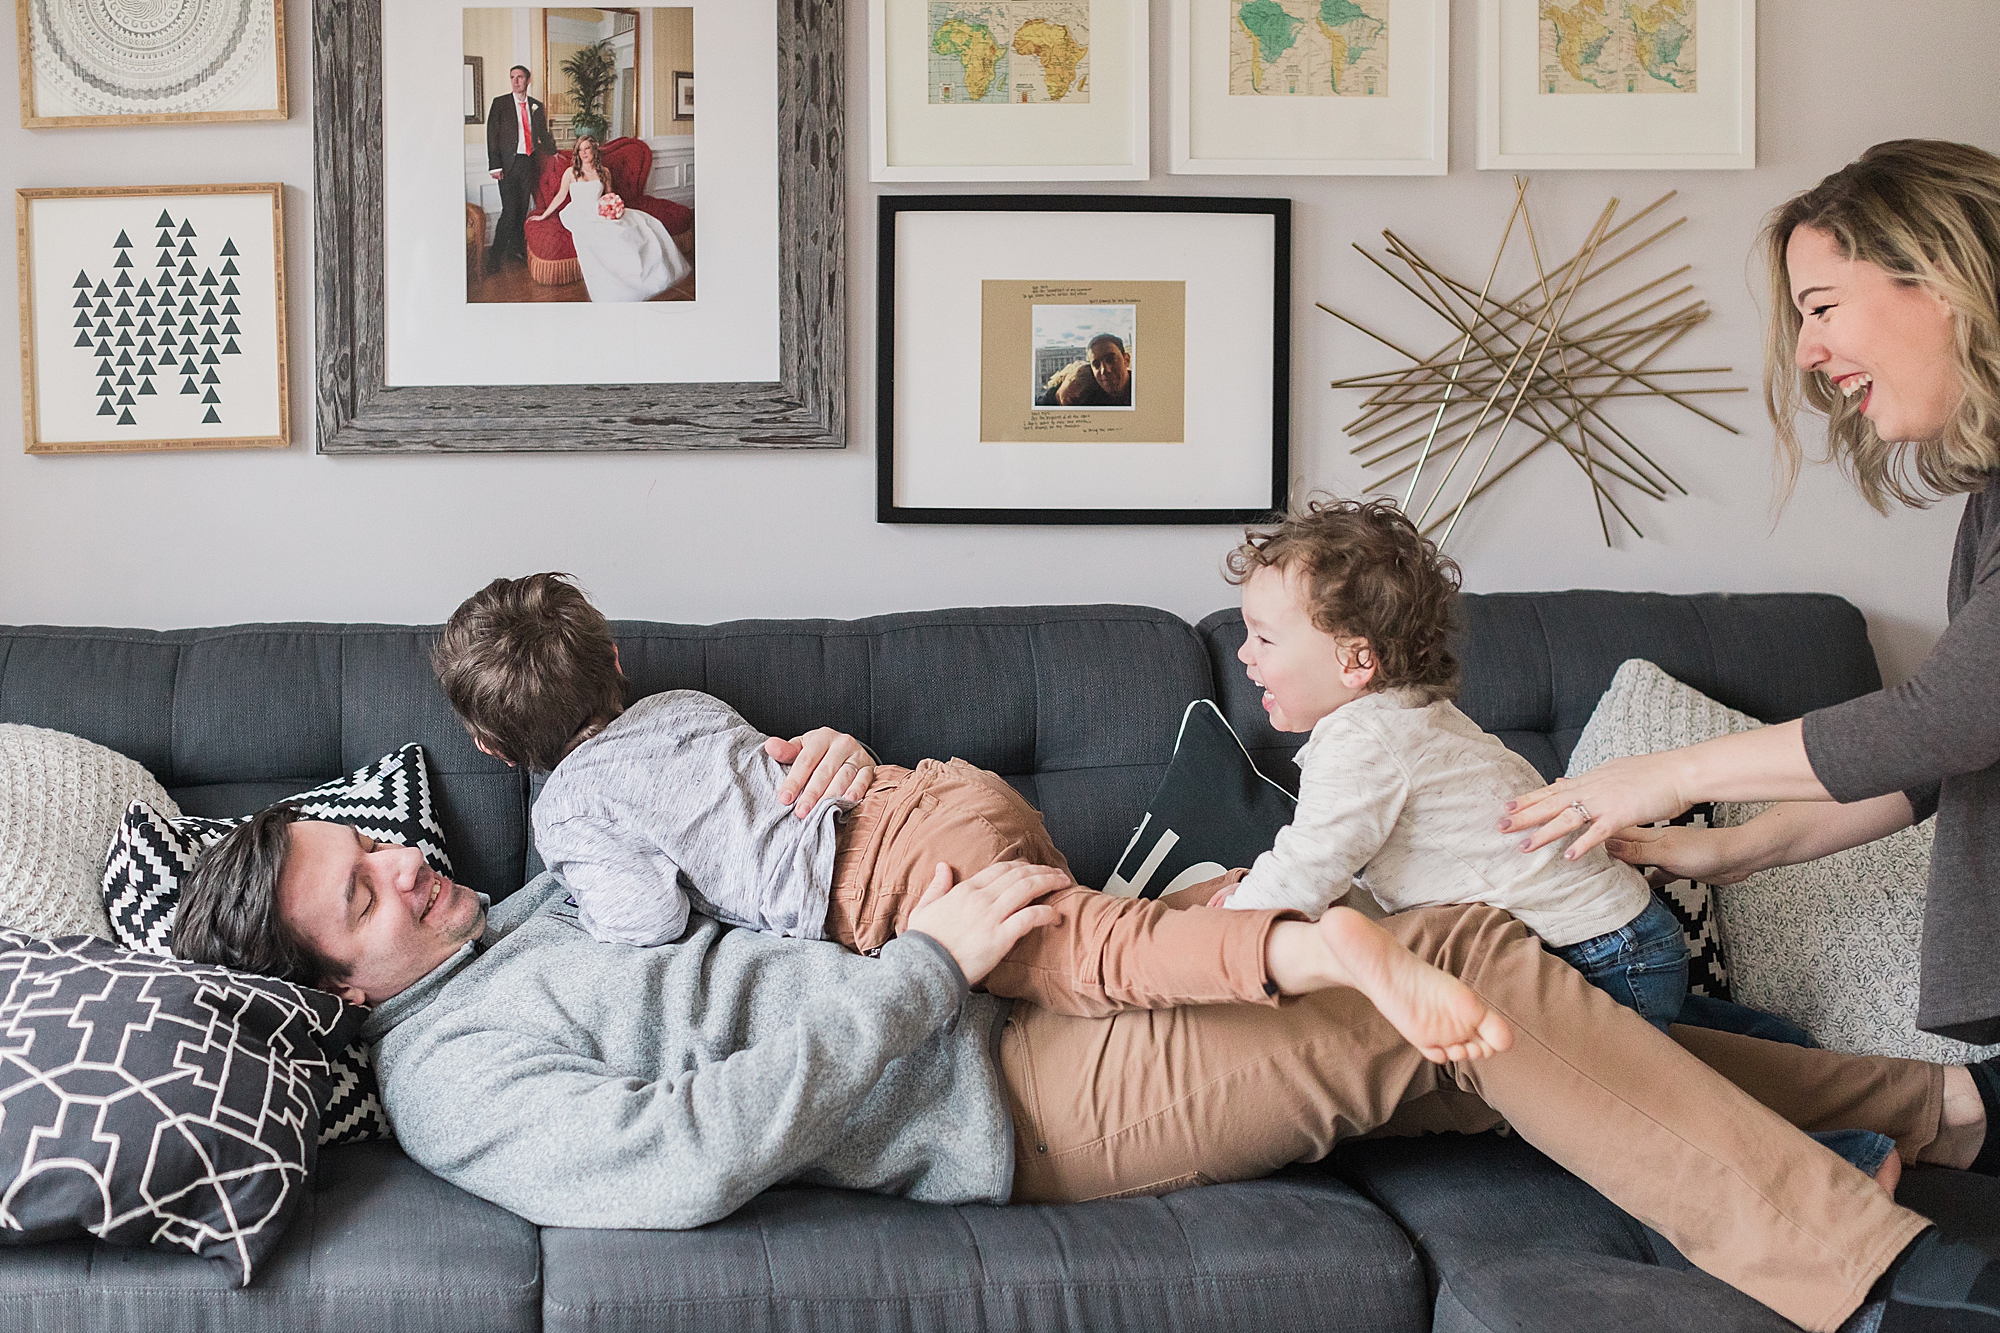 Why You Shouldn’t Be Afraid to Book Lifestyle Family Portraits: four myths about lifestyle photos at home